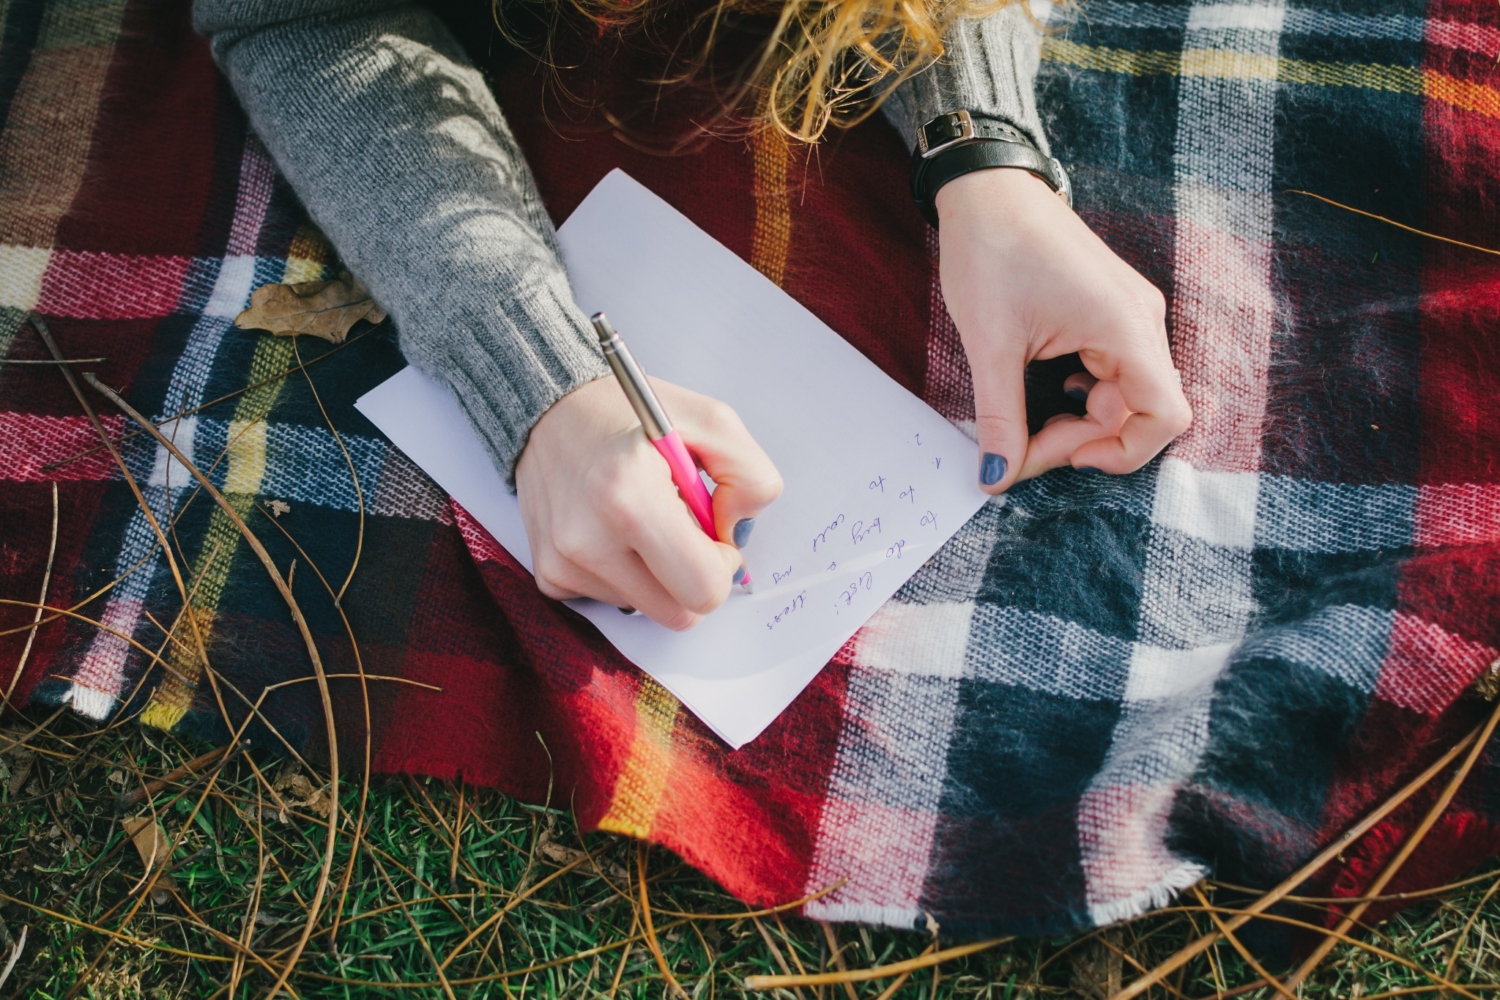 A person journaling outdoors while laying on a tartan blanket to reflect during Beltane.